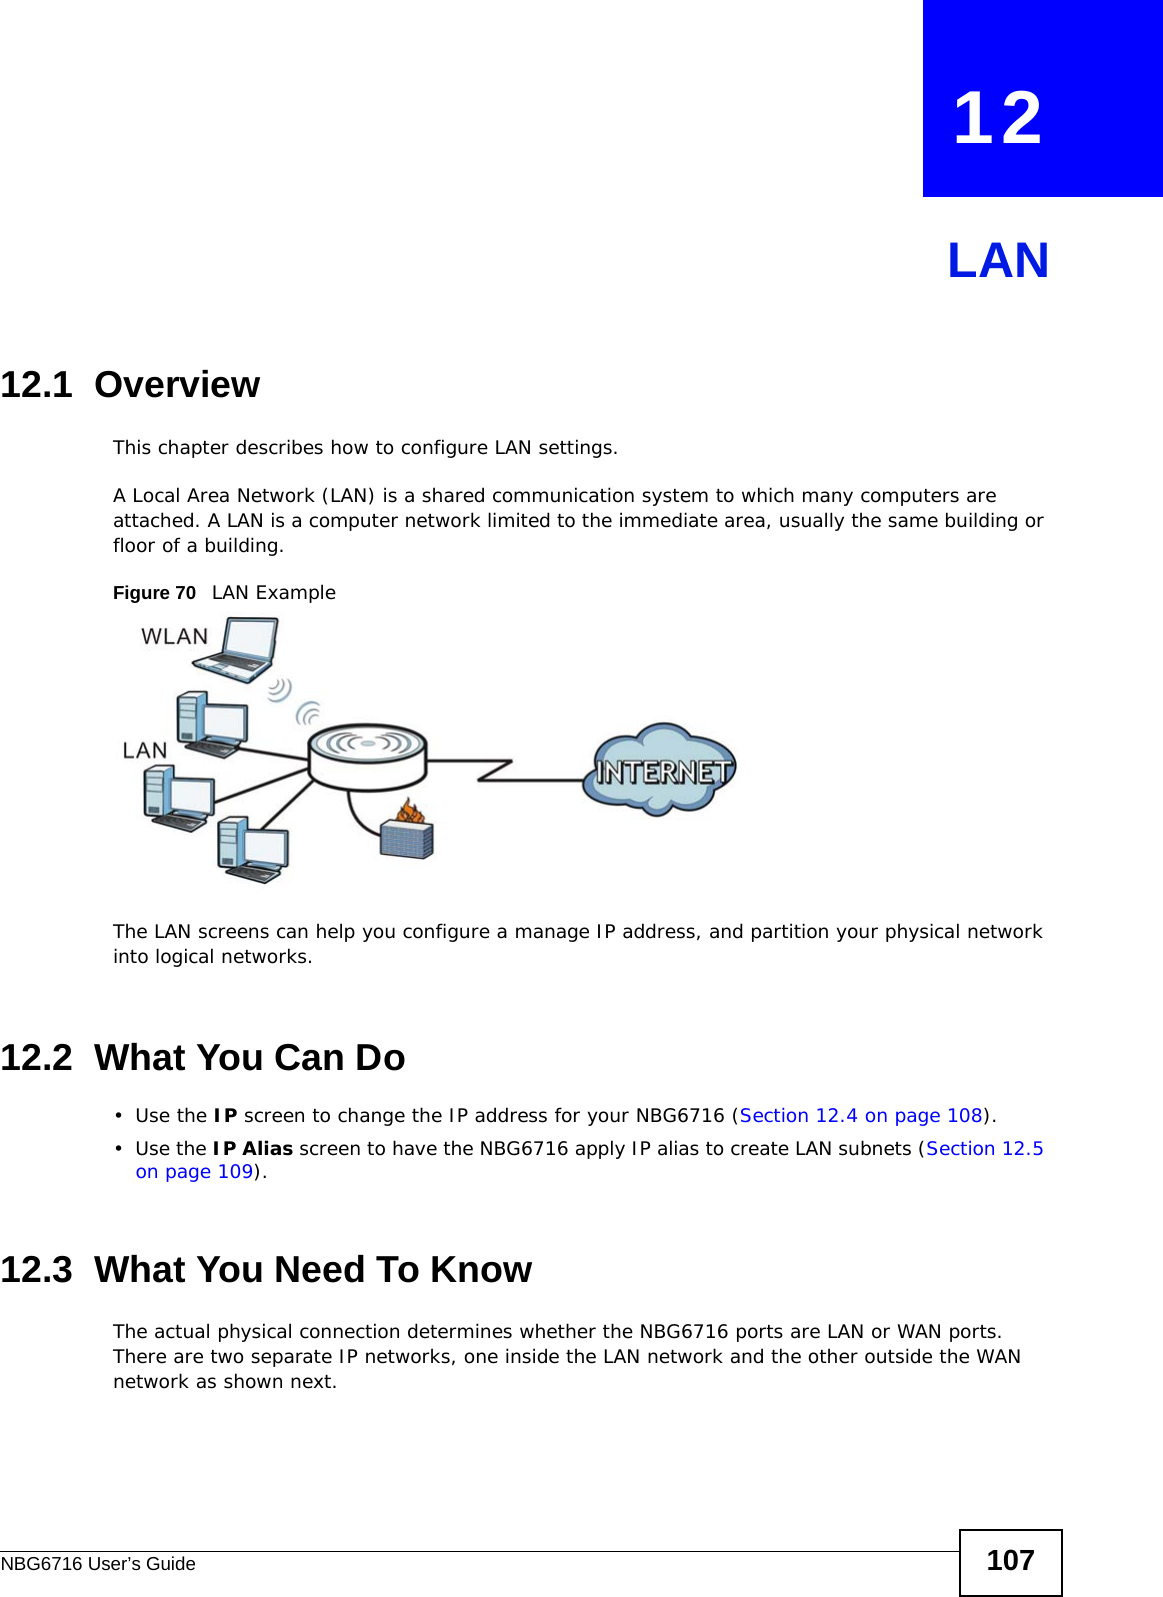 NBG6716 User’s Guide 107CHAPTER   12LAN12.1  OverviewThis chapter describes how to configure LAN settings.A Local Area Network (LAN) is a shared communication system to which many computers are attached. A LAN is a computer network limited to the immediate area, usually the same building or floor of a building. Figure 70   LAN ExampleThe LAN screens can help you configure a manage IP address, and partition your physical network into logical networks.12.2  What You Can Do•Use the IP screen to change the IP address for your NBG6716 (Section 12.4 on page 108).•Use the IP Alias screen to have the NBG6716 apply IP alias to create LAN subnets (Section 12.5 on page 109).12.3  What You Need To KnowThe actual physical connection determines whether the NBG6716 ports are LAN or WAN ports. There are two separate IP networks, one inside the LAN network and the other outside the WAN network as shown next.